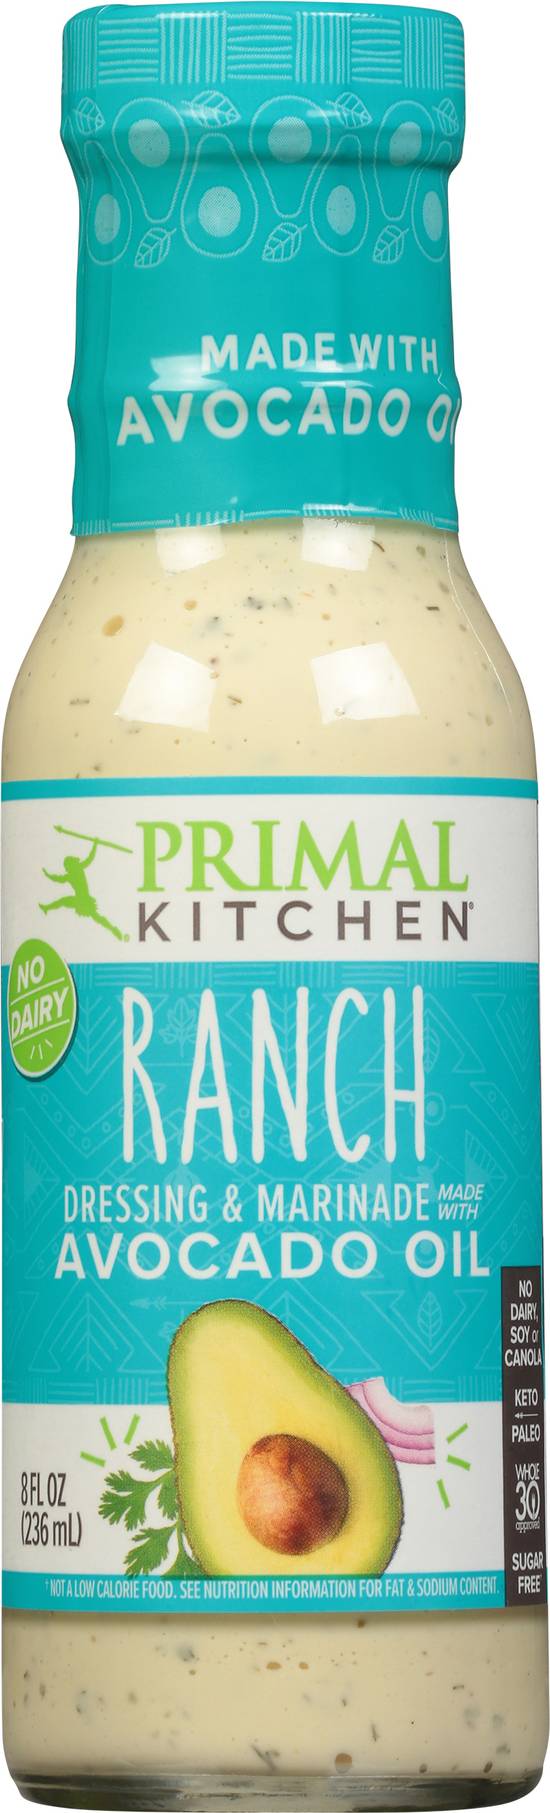 Primal Kitchen Dressing and Marinade With Avocado Oil (ranch)